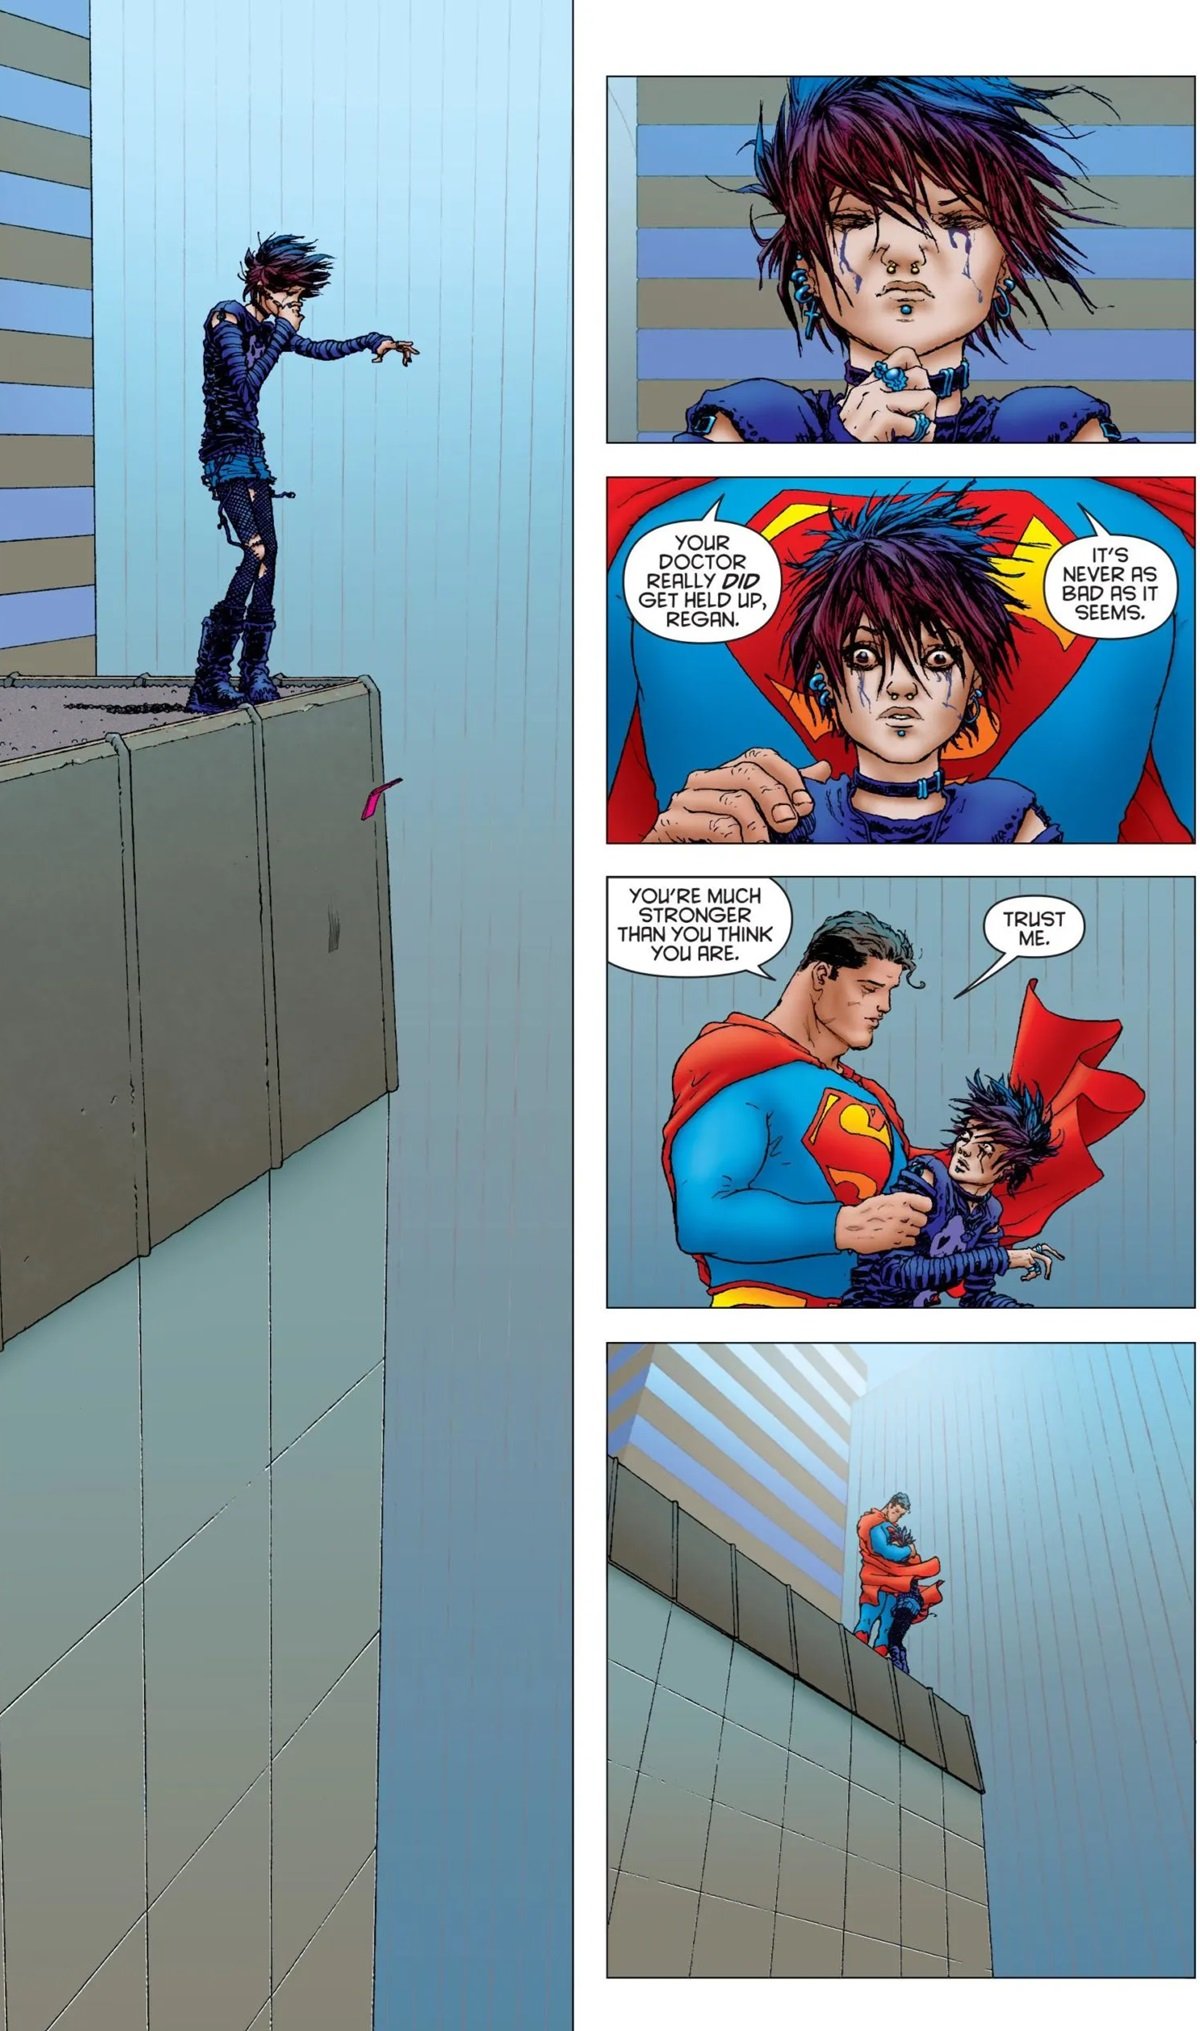 Superman saves a suicidal woman in a famous panel from All-Star Superman #10, by artist Frank Quitely.